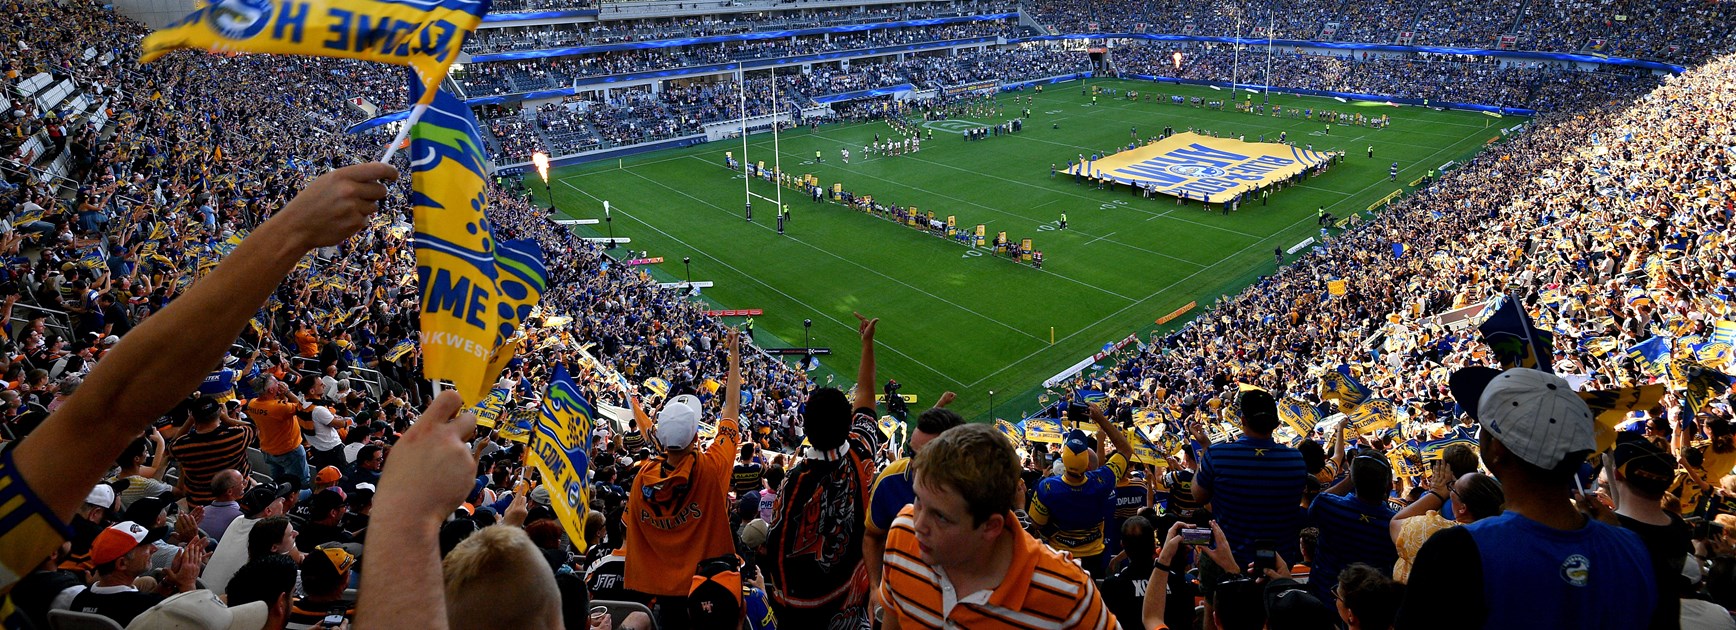 The first game at Bankwest Stadium in round six was a day to remember for Eels fans.